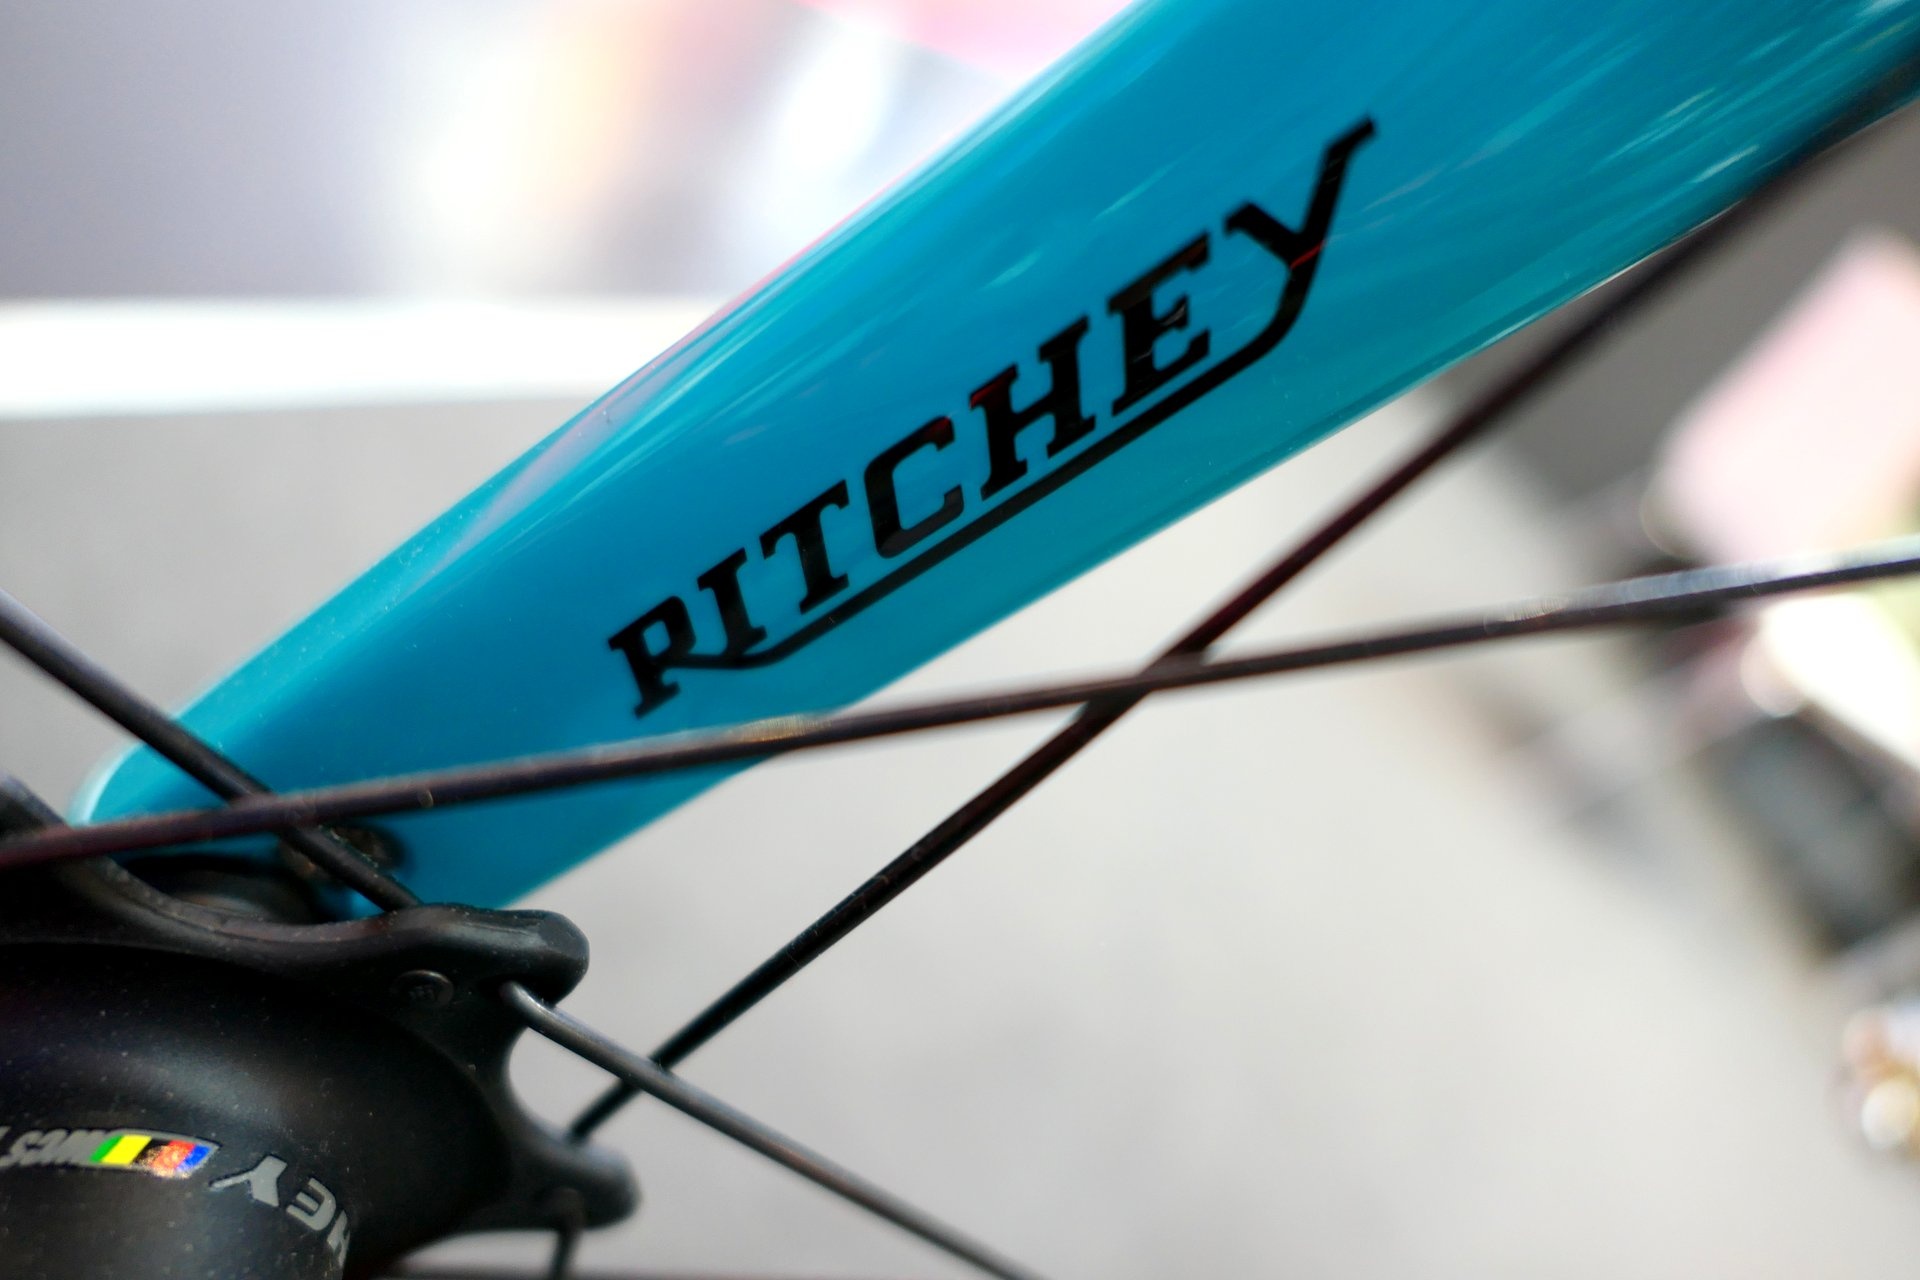 Ritchey Bicycle, Take my money, Cycling must-haves, Ultimate bike selection, 1920x1280 HD Desktop